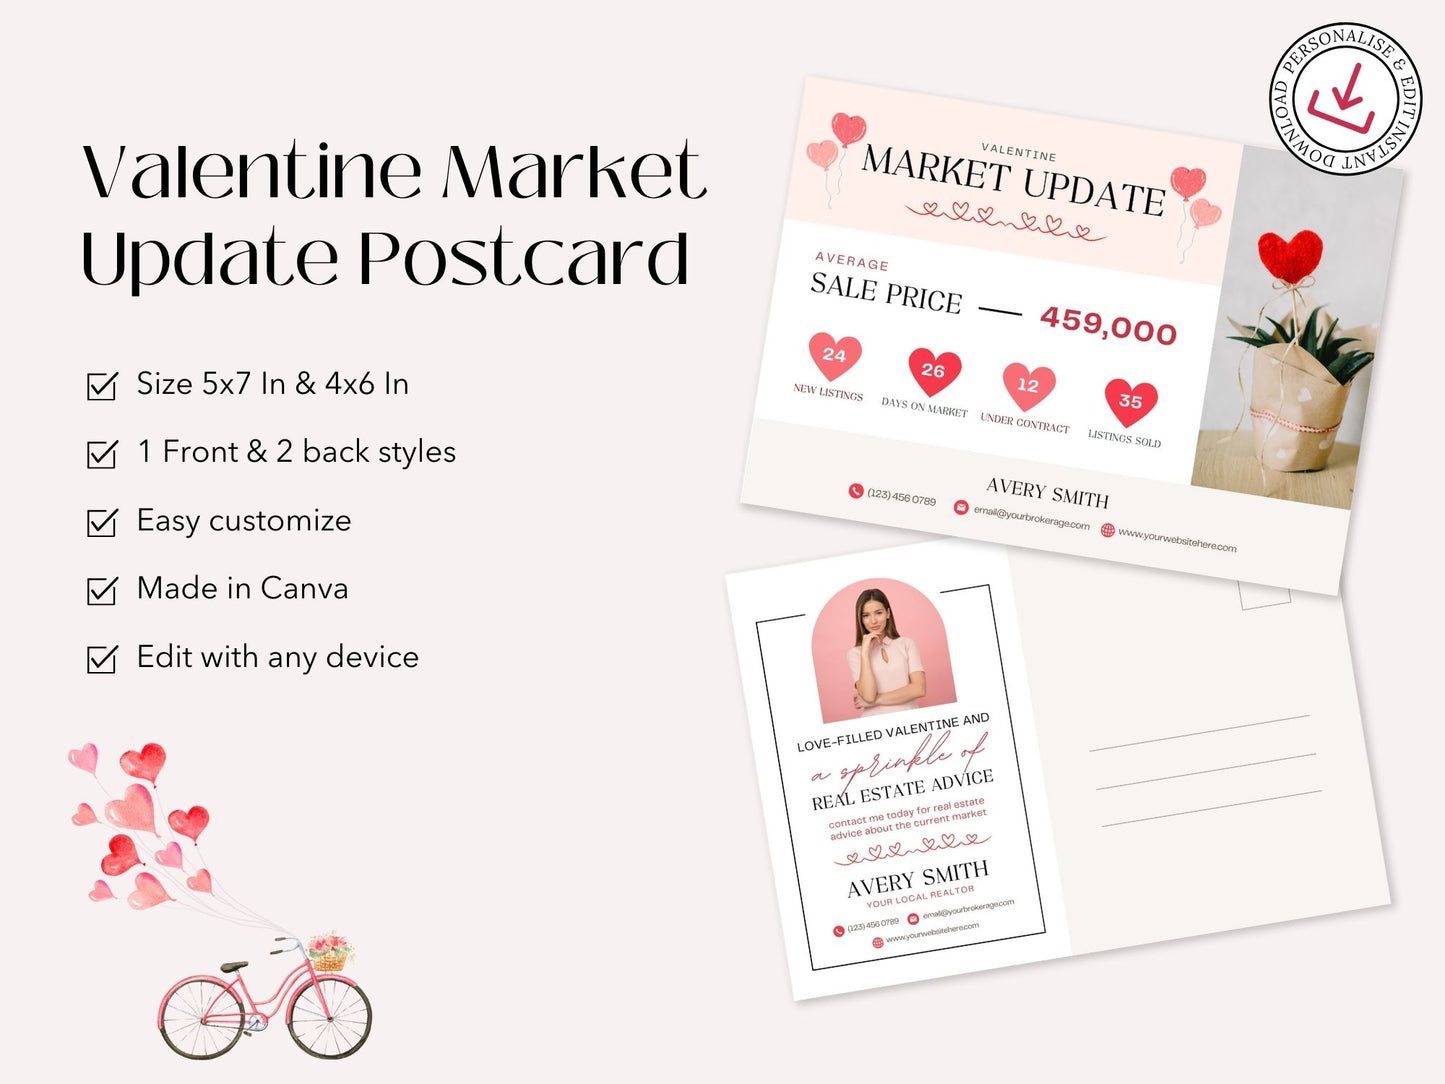 Valentine Market Update Postcard - Professionally designed real estate postcard combining market insights with a touch of Valentine's Day charm.